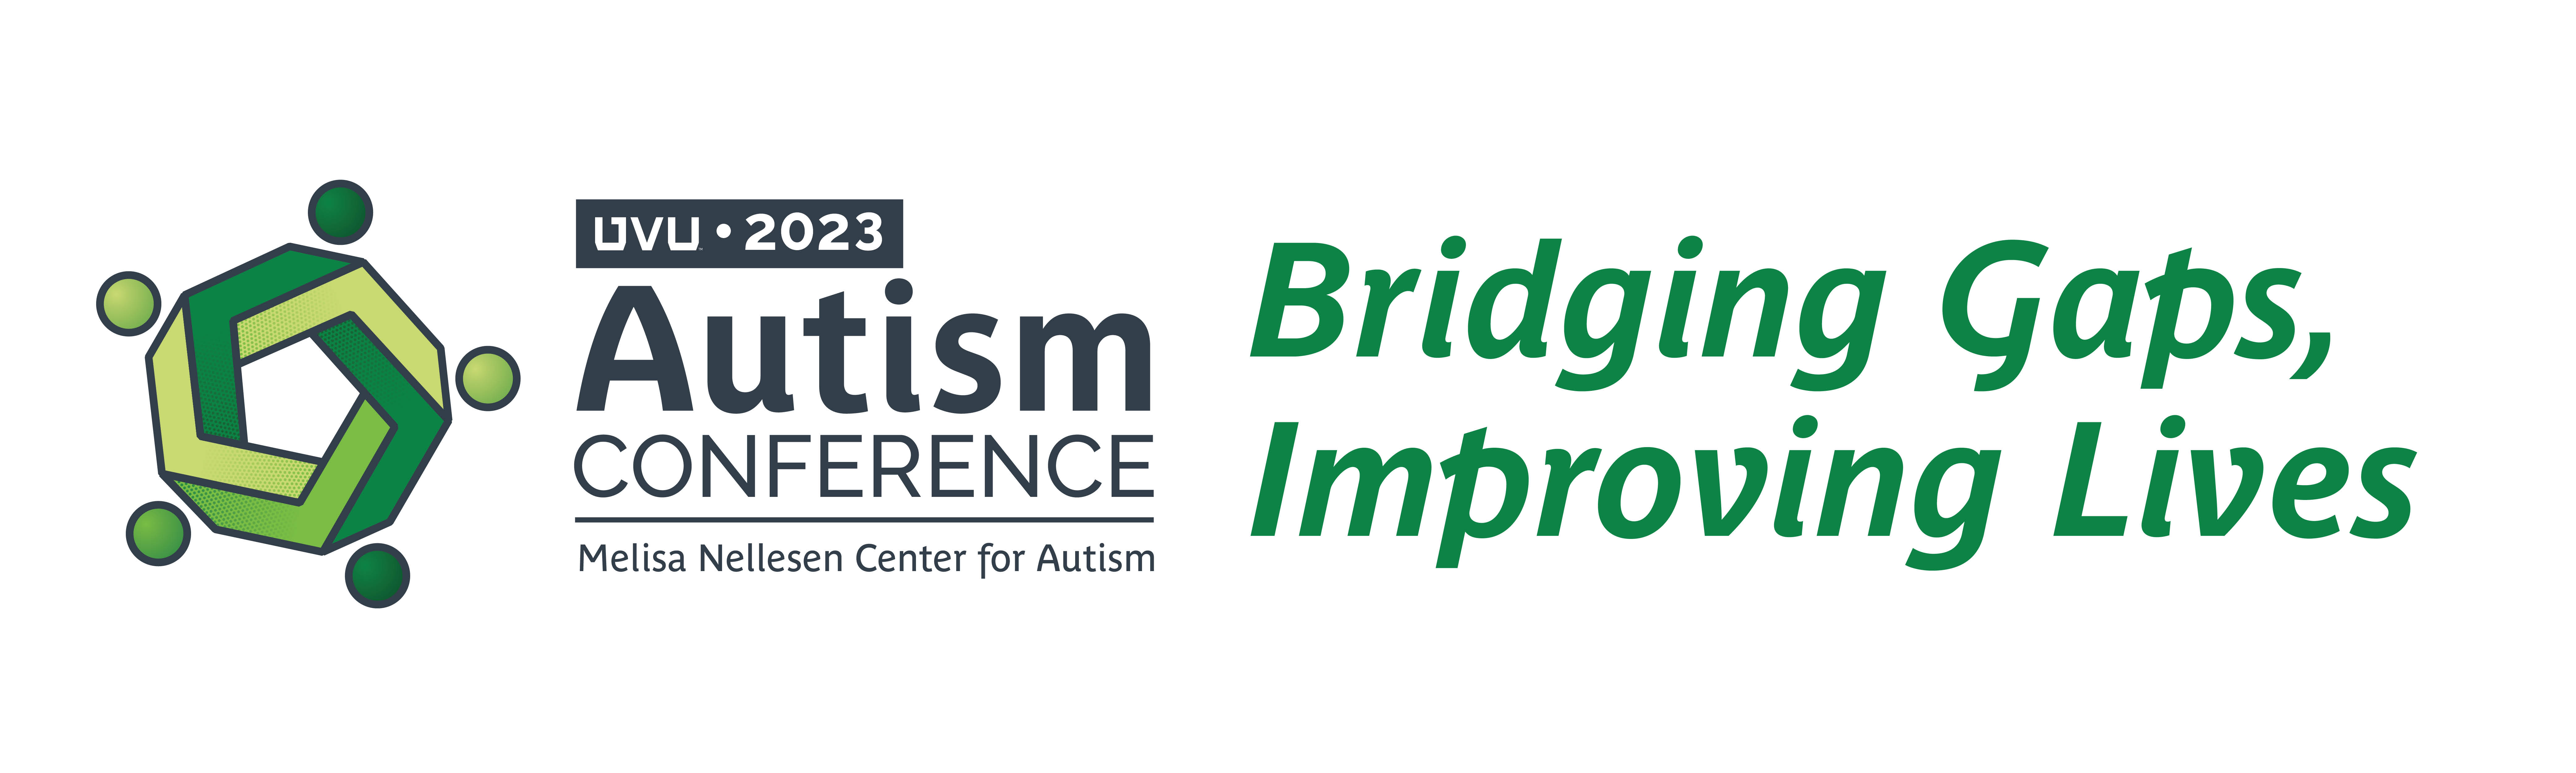 Autism Conference 2023